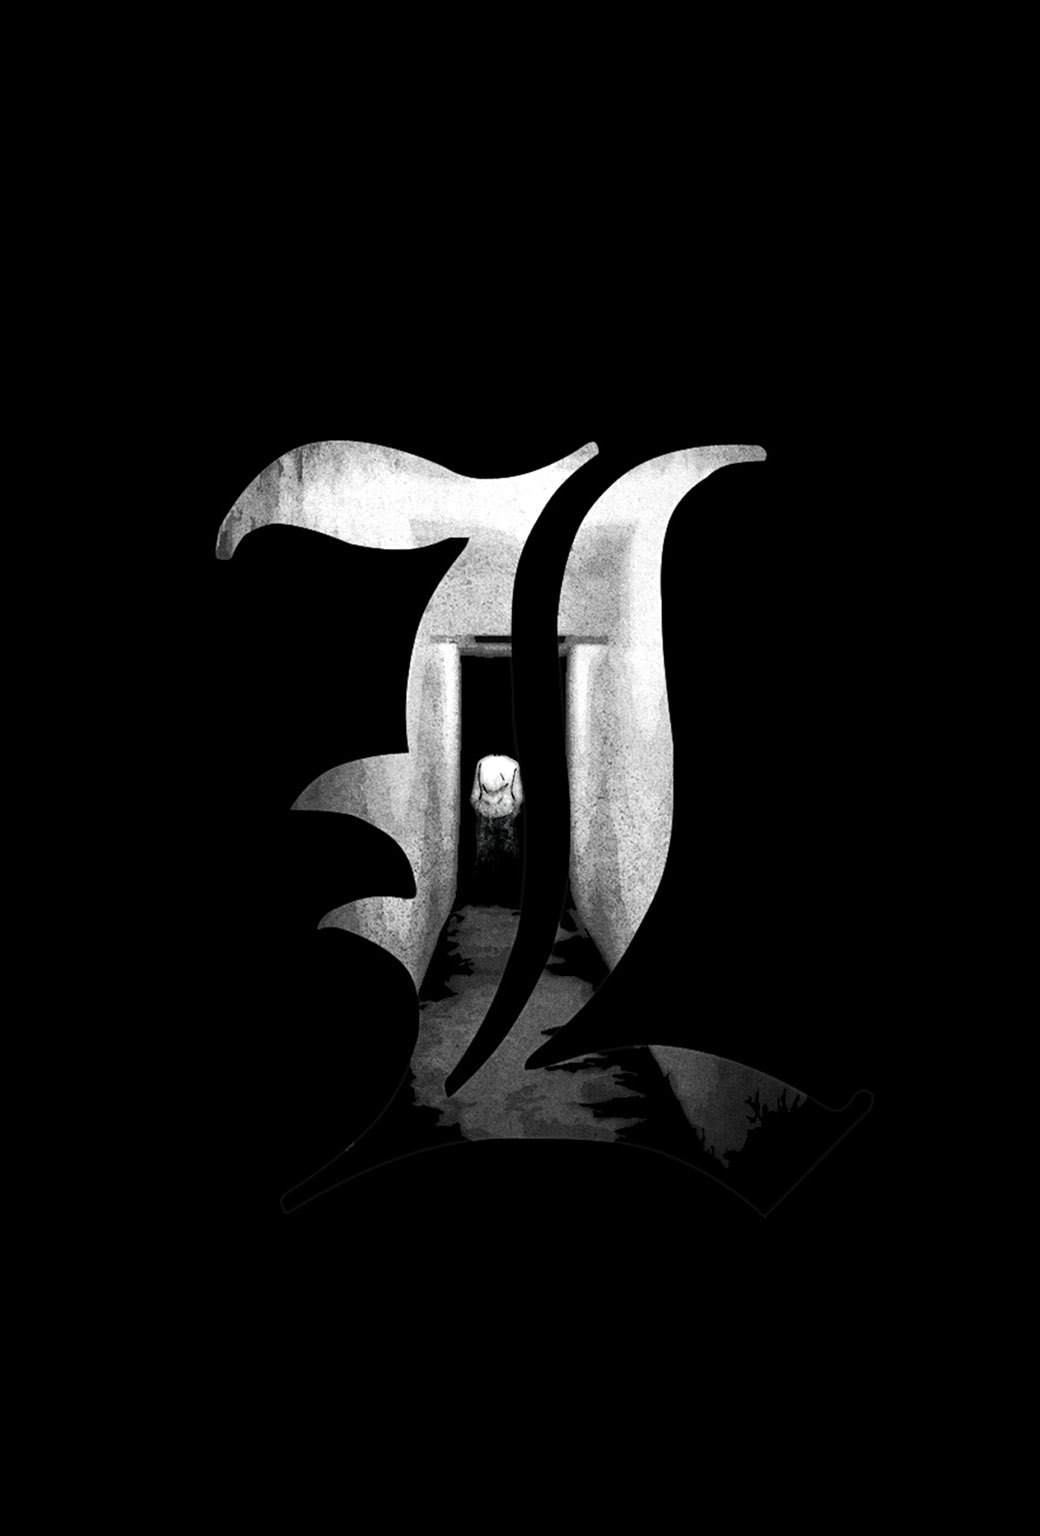 death note wallpaper iphone,black,black and white,font,logo,monochrome photography